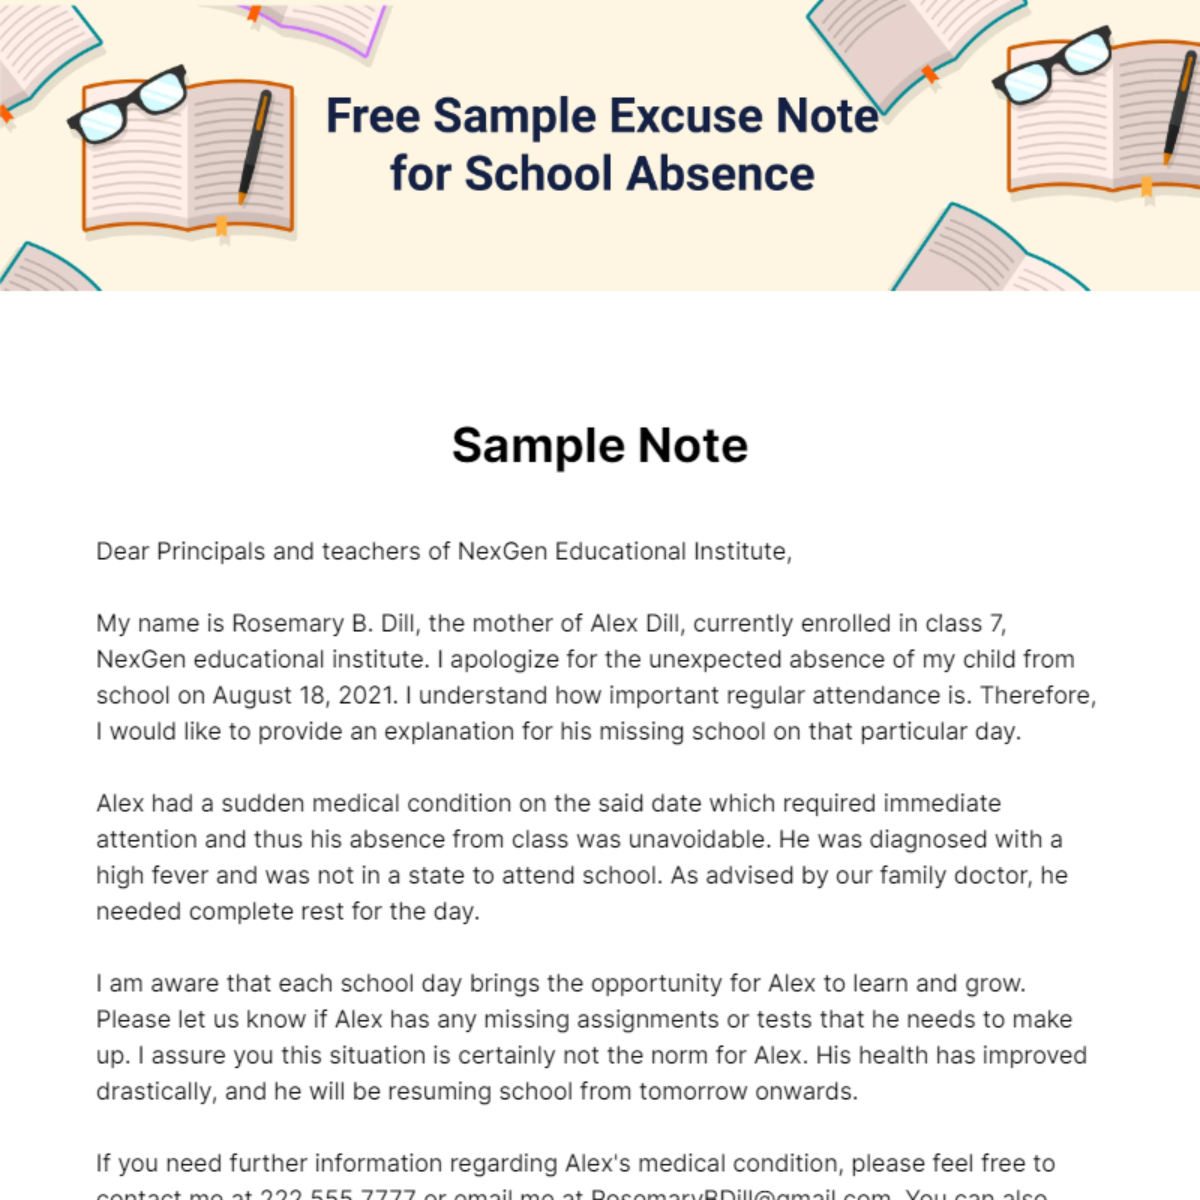 Sample Excuse Note for School Absence Template